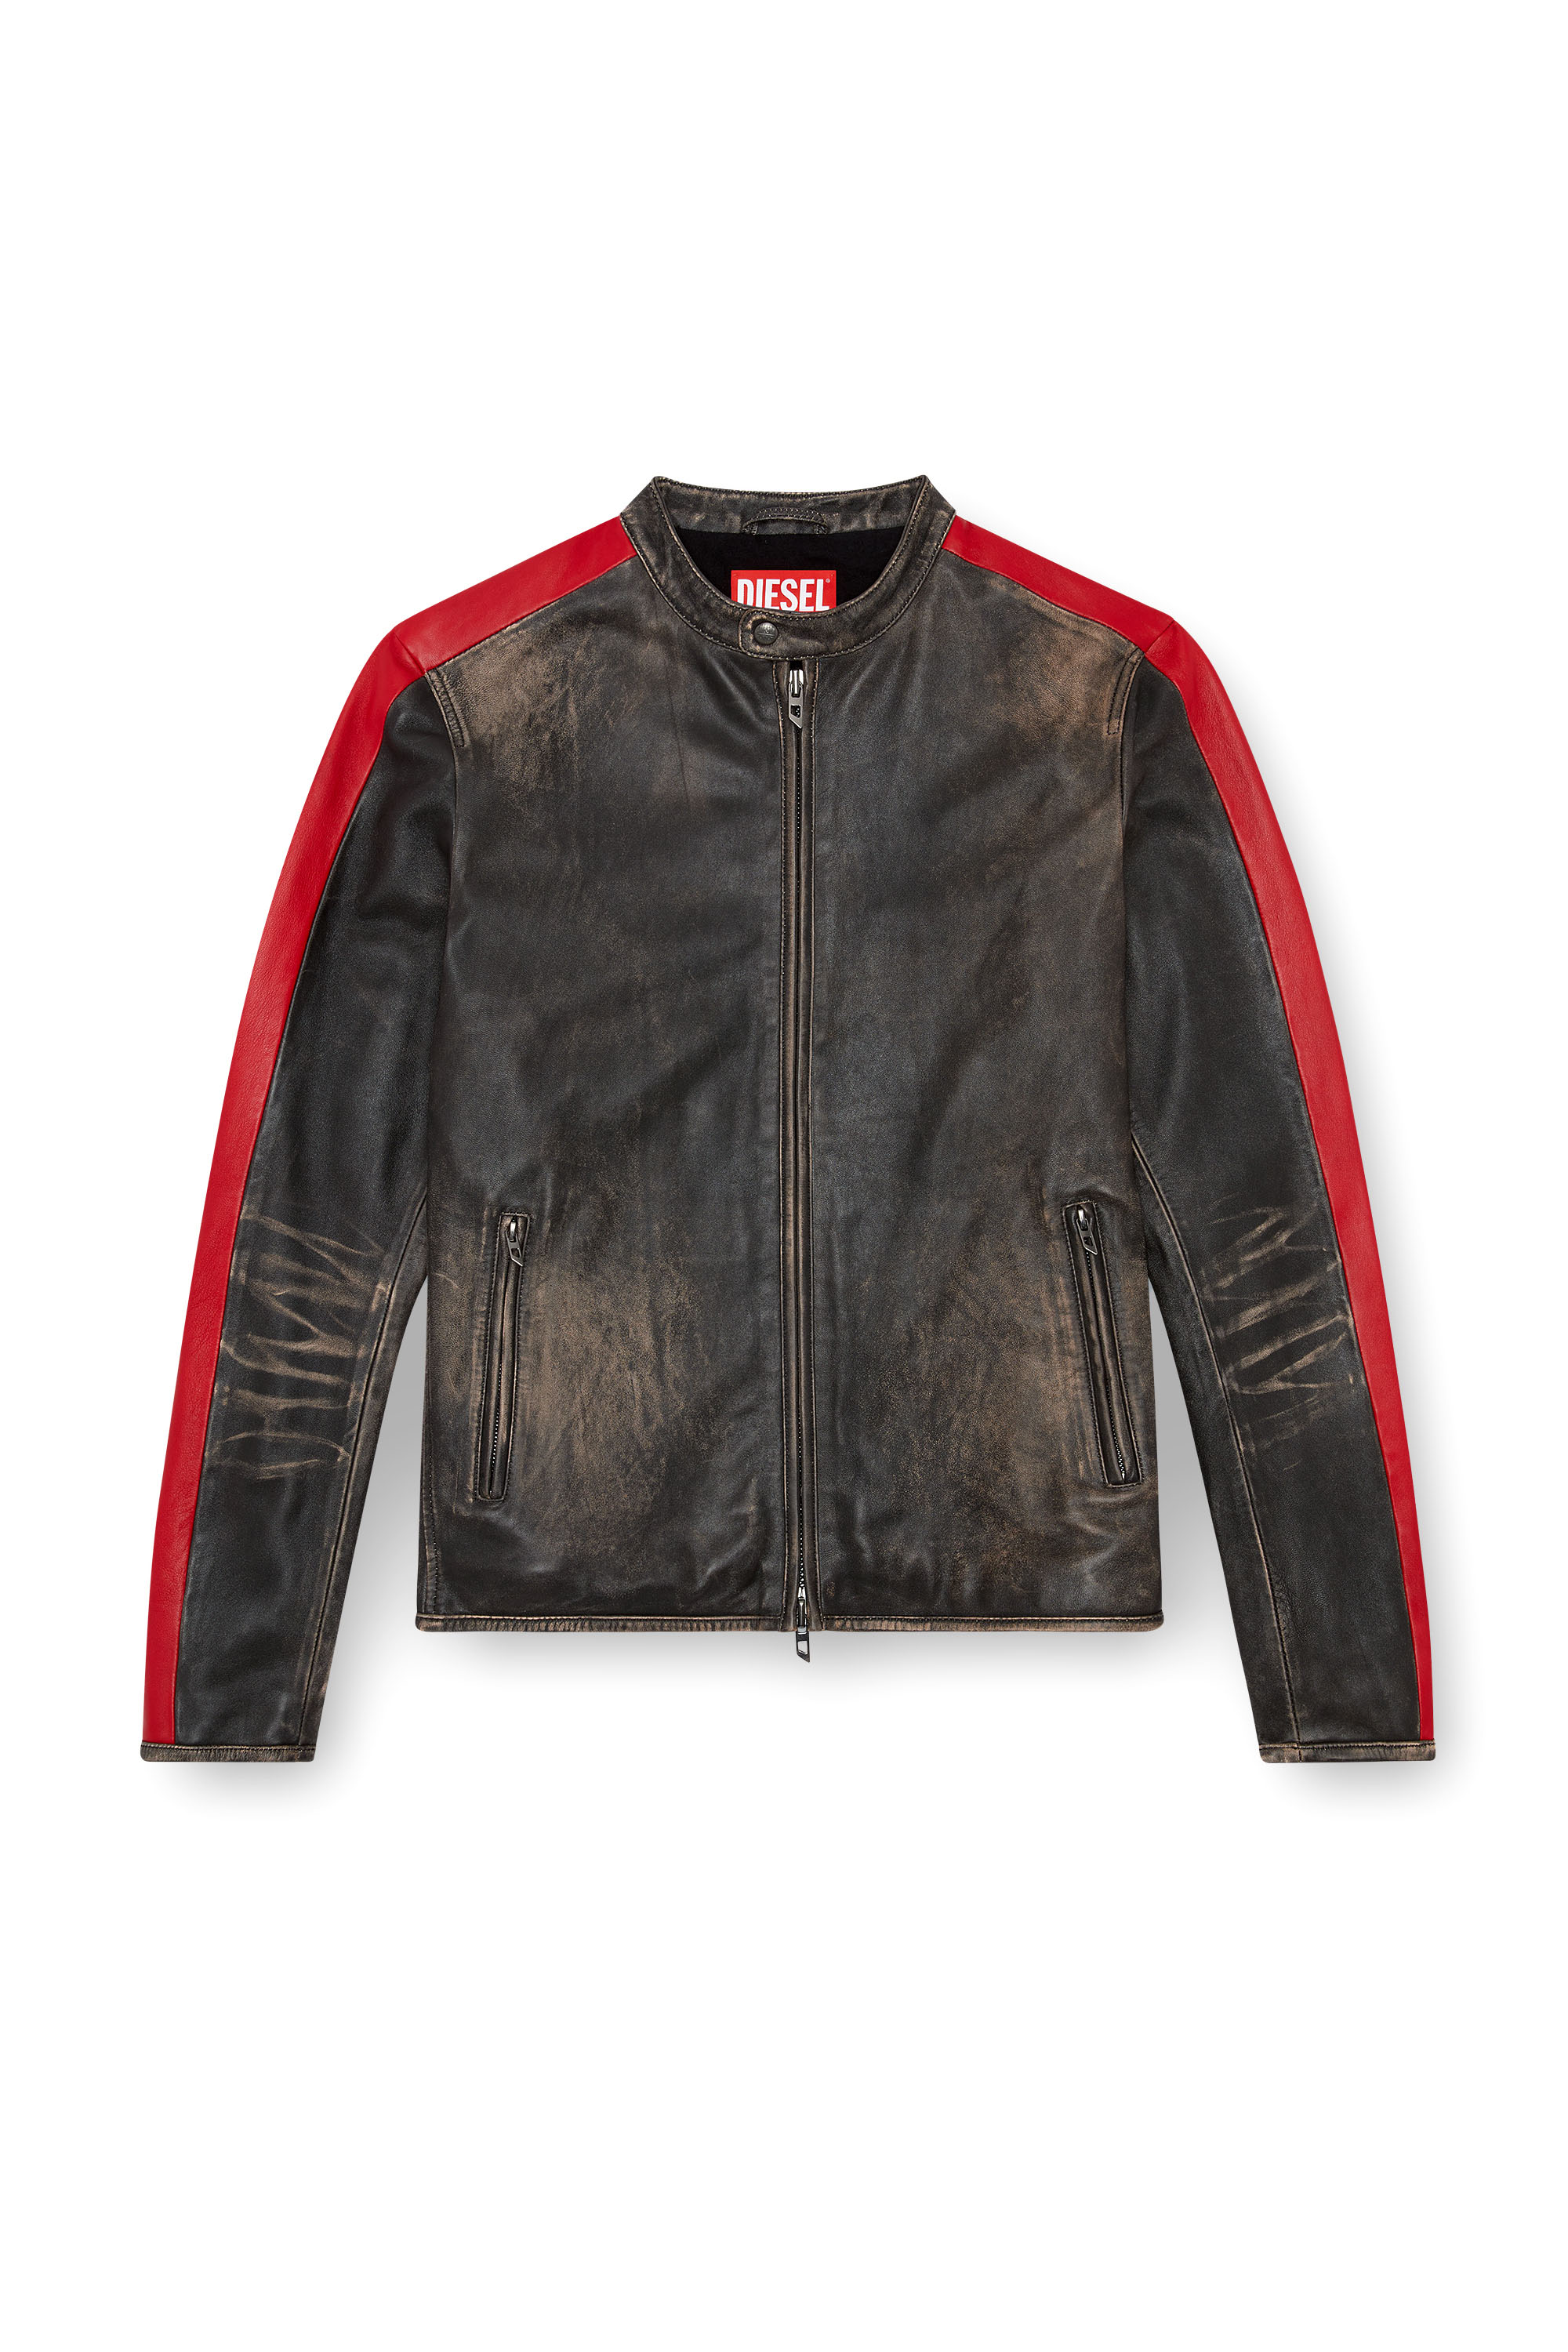 Diesel - L-RENN, Male Leather jacket with contrasting stripes in マルチカラー - Image 3